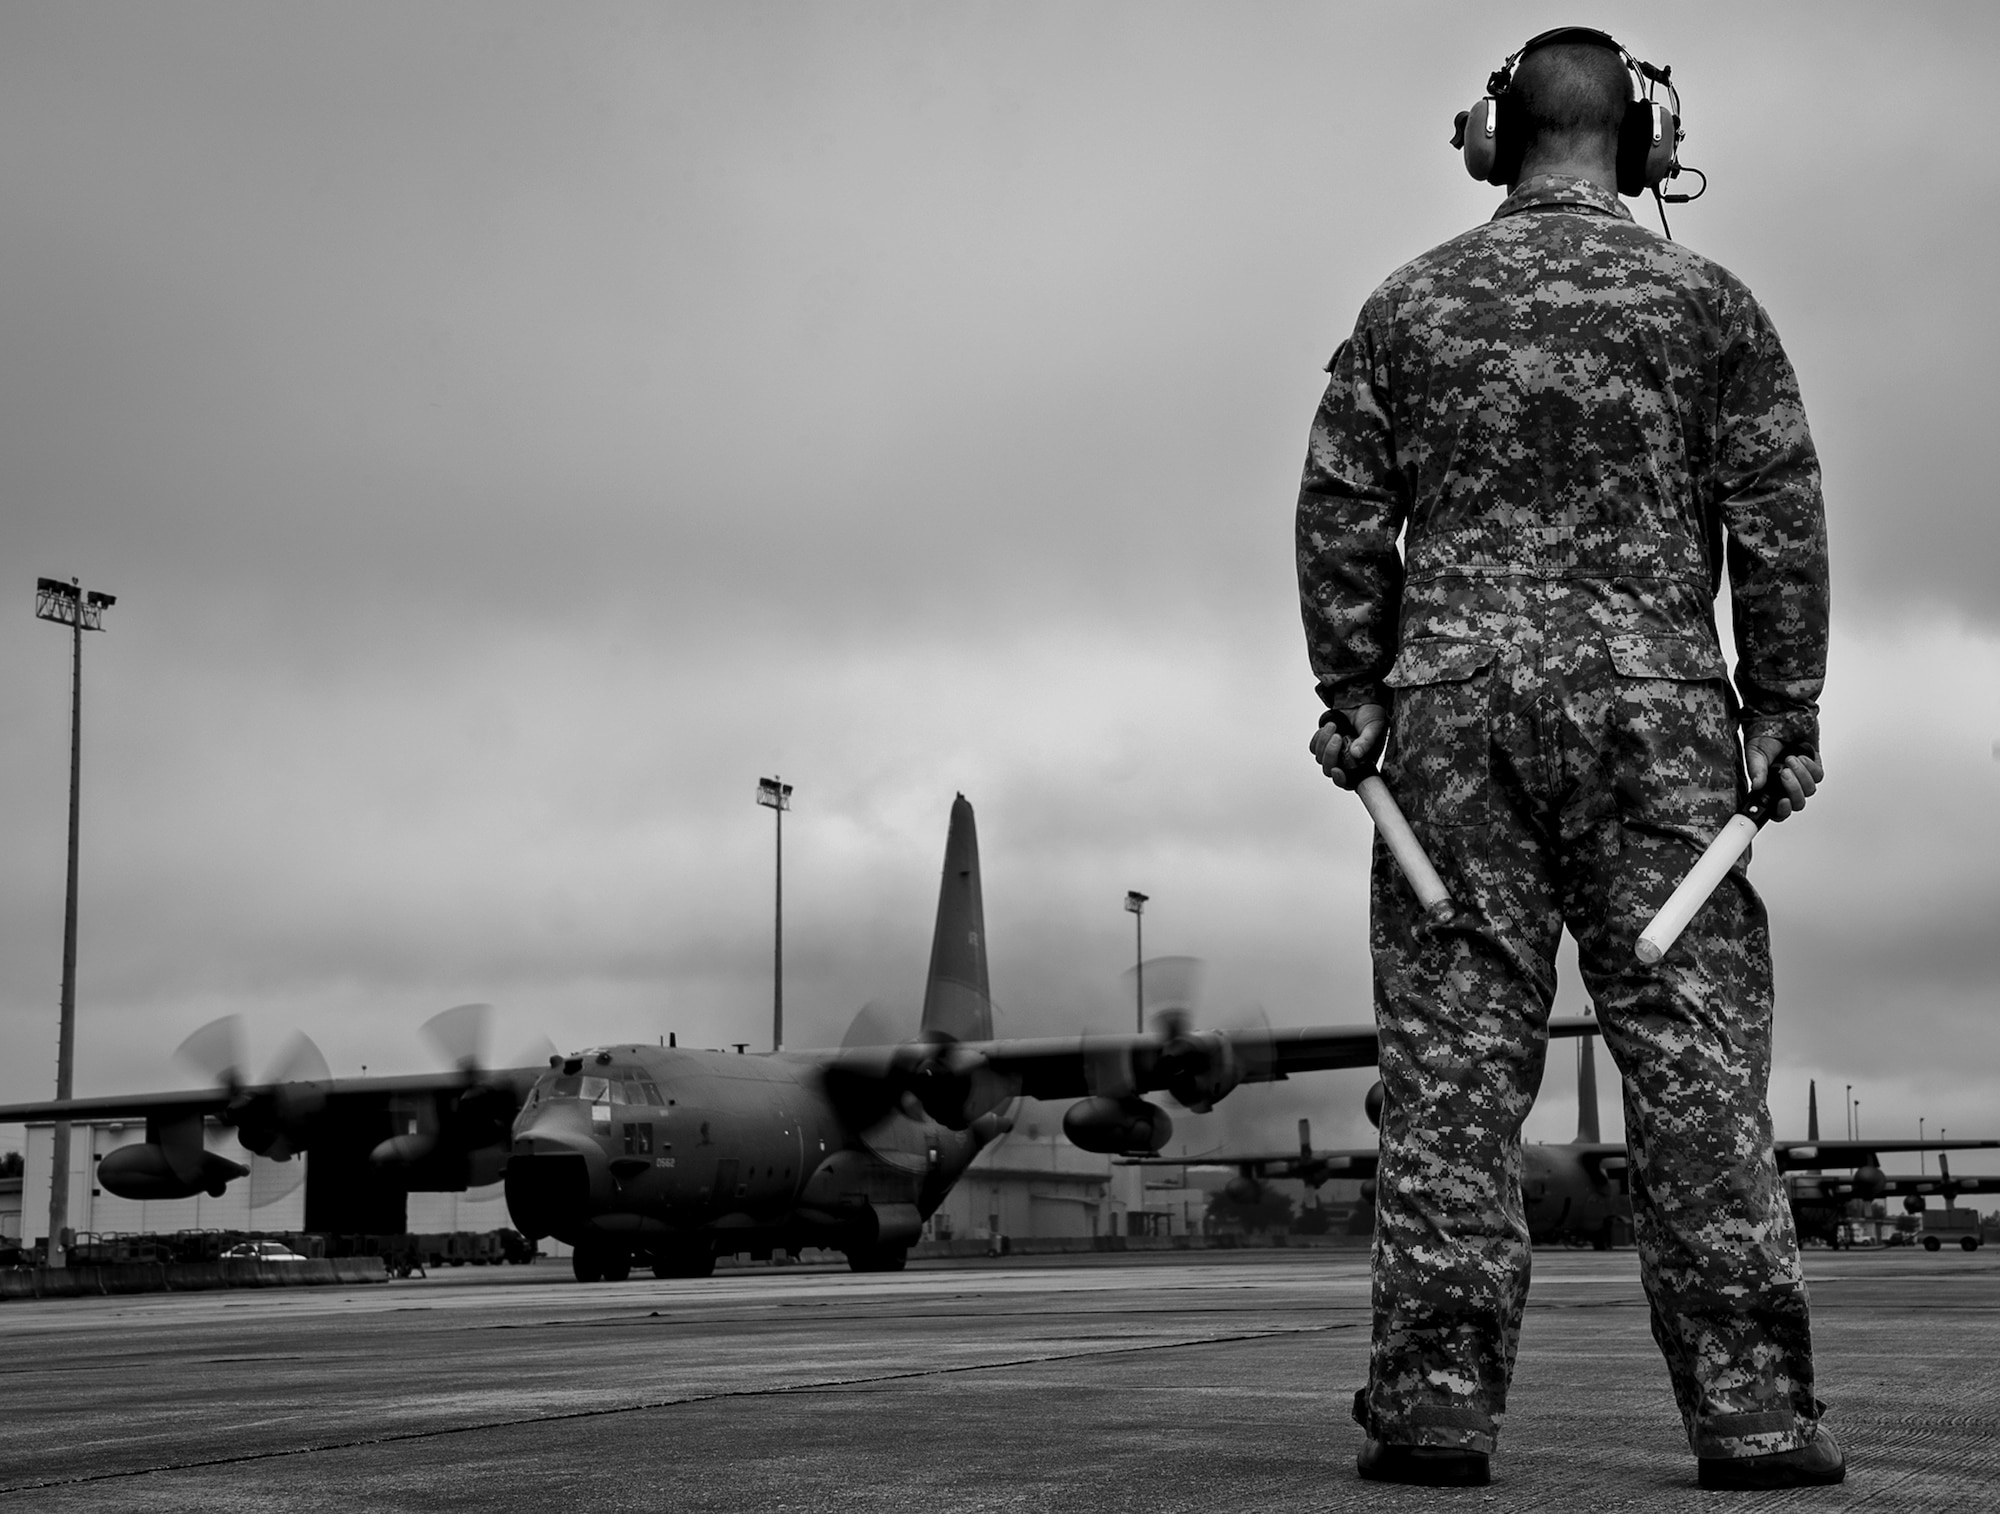 Master Sgt. Robert Hoeft, of the 919th Aircraft Maintenance Squadron, prepares to marshal out an MC-130E Combat Talon I at Duke Field, Fla.  There are only five Talons left at the special operations reserve base.  The 919th has begun remissioning to the Aviation Foreign Internal Defense aircraft, the C-145 Skytruck.  (U.S. Air Force photo/Tech. Sgt. Samuel King Jr.)